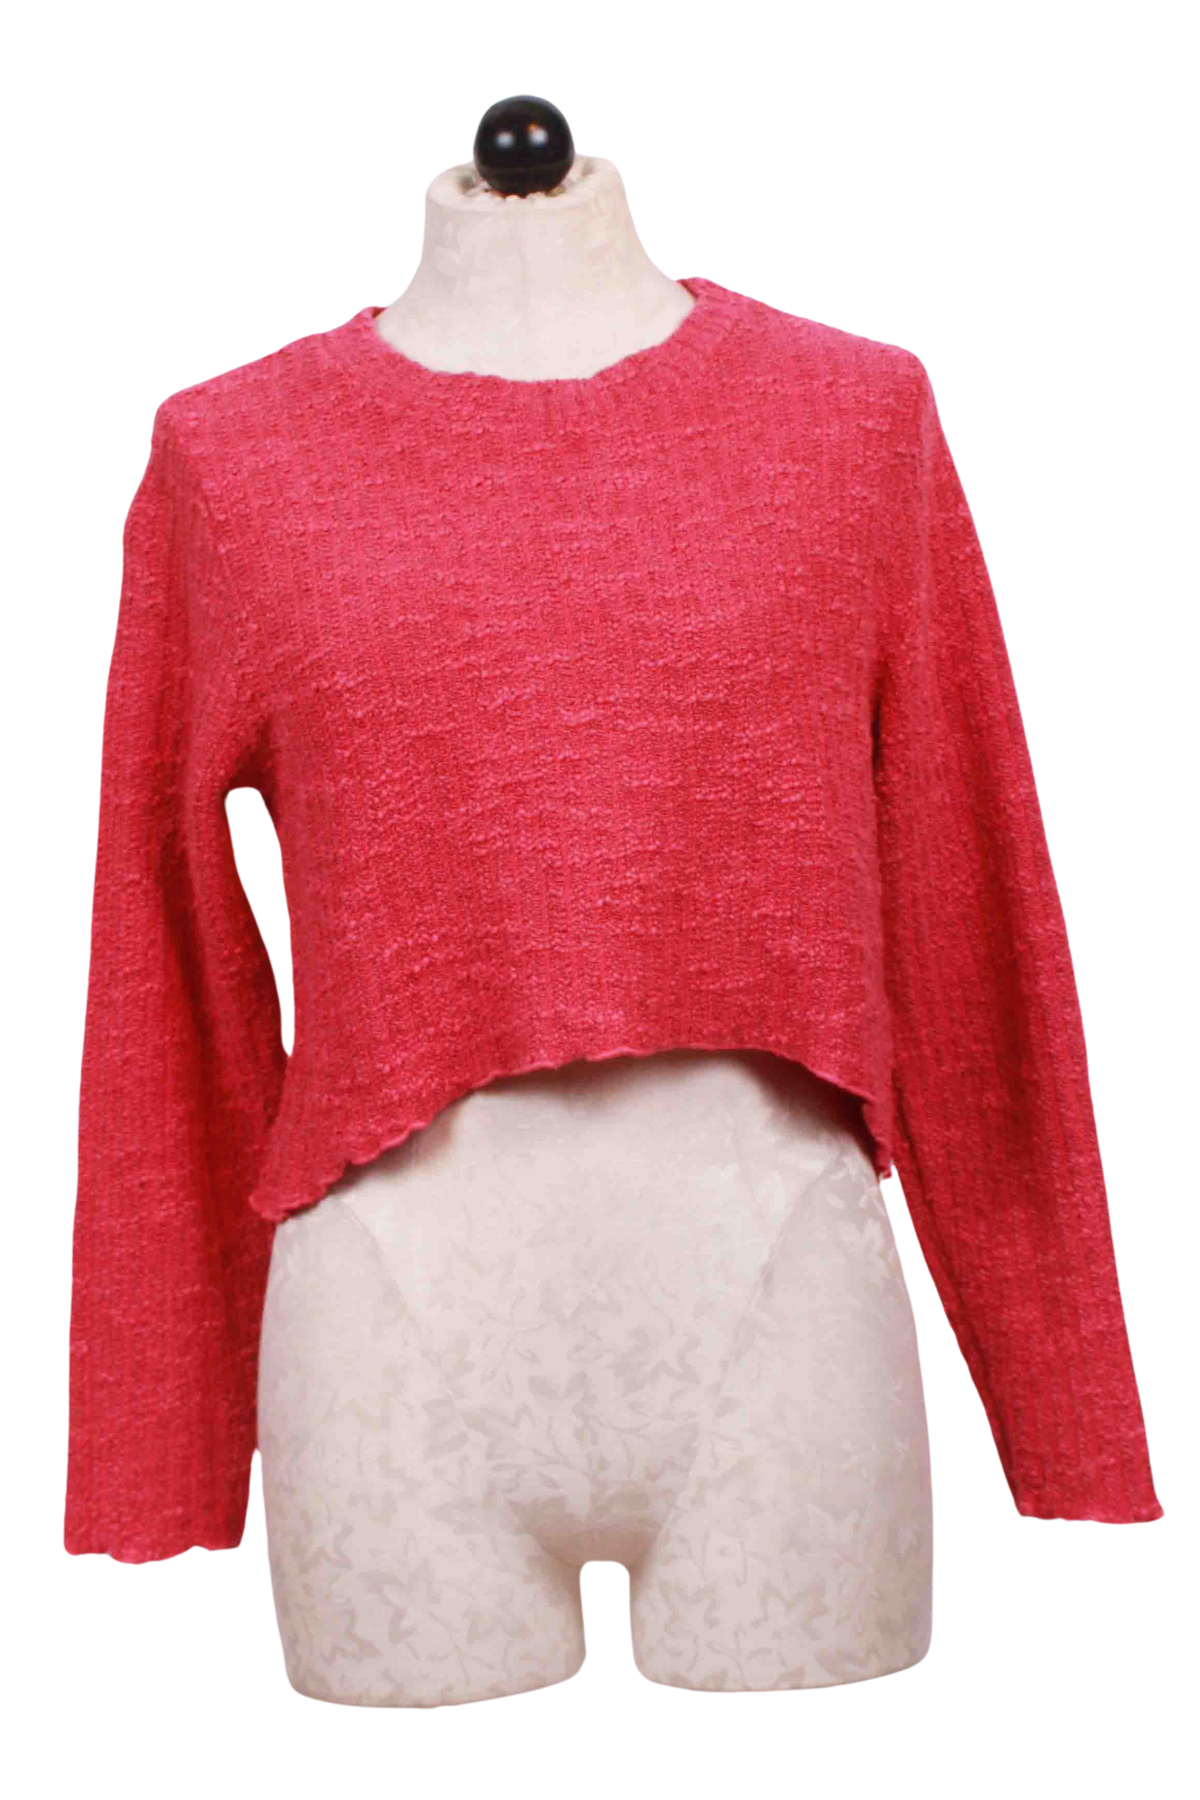 Watermelon Curved Crop Sweater by Cut Loose